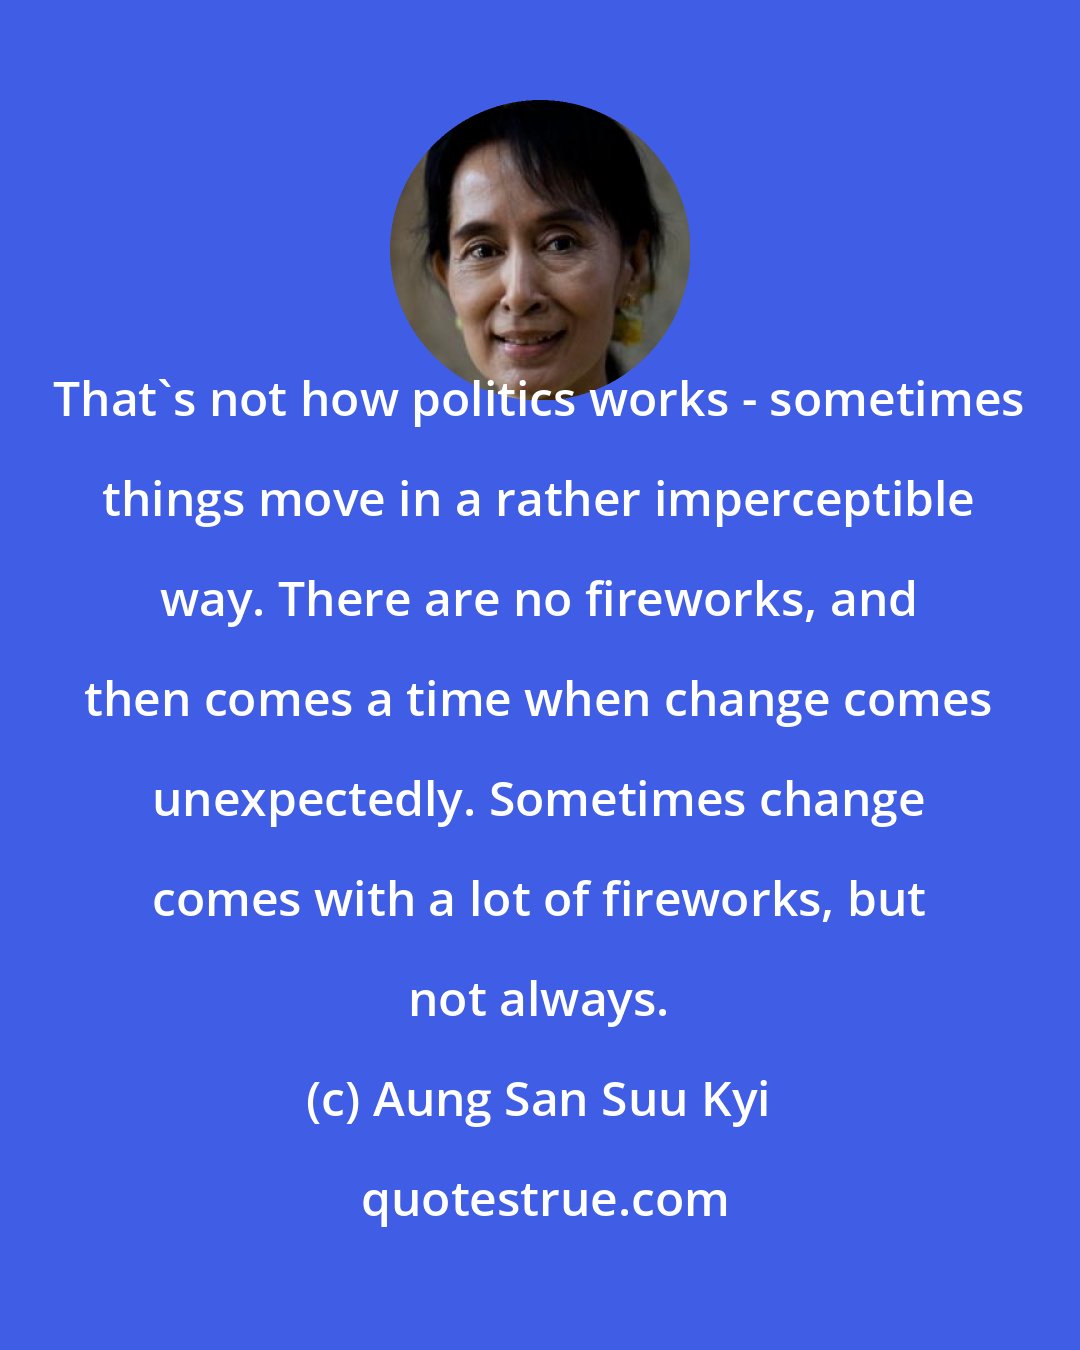 Aung San Suu Kyi: That's not how politics works - sometimes things move in a rather imperceptible way. There are no fireworks, and then comes a time when change comes unexpectedly. Sometimes change comes with a lot of fireworks, but not always.